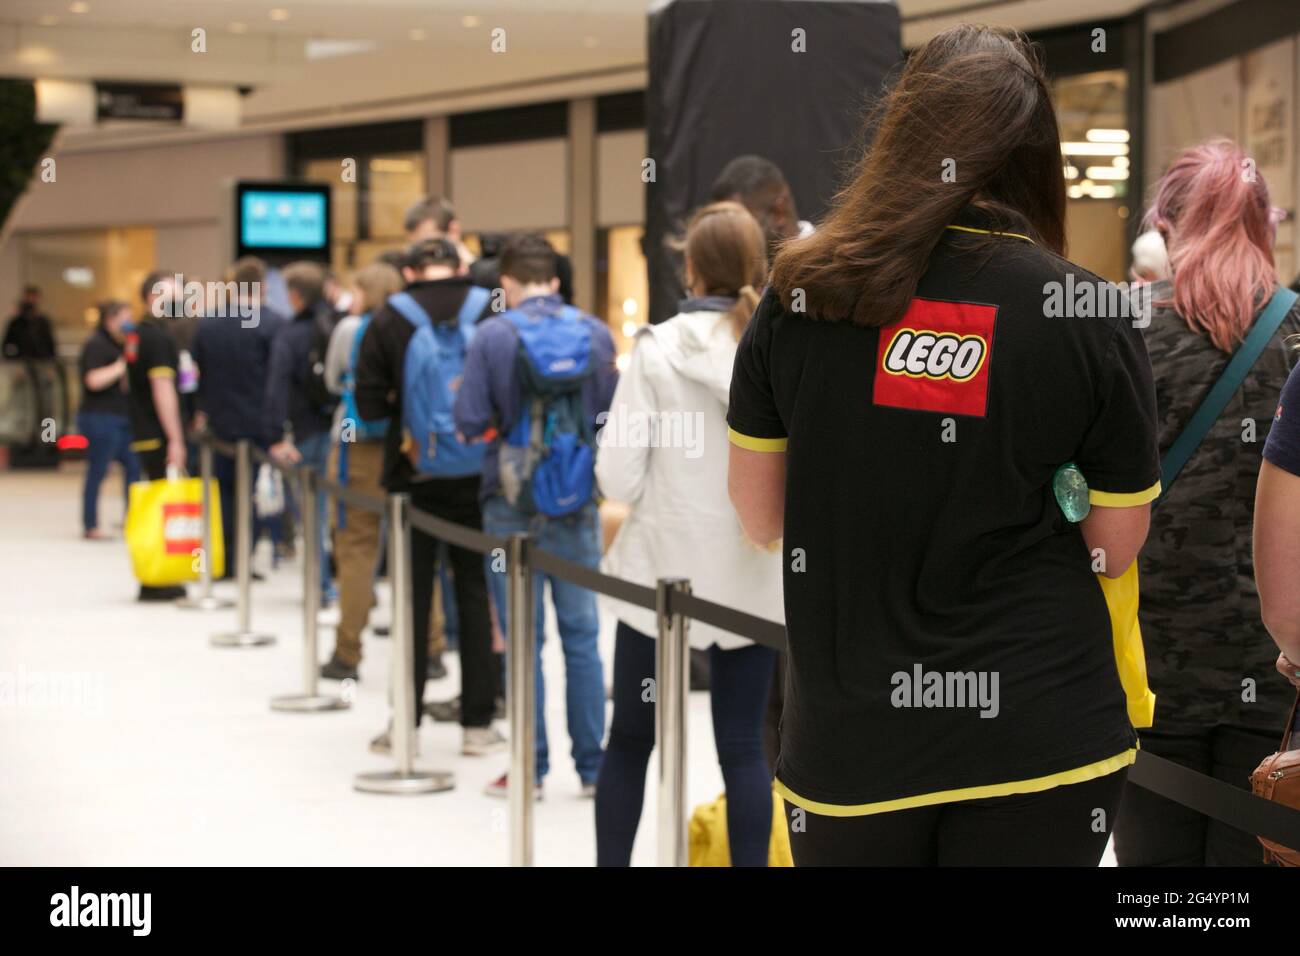 Edinburgh, UK, 24th June, 2021: Shoppers queued to visit the Lego store at  the opening of the first phase of the £1 billion St James Quarter retail  destination in Edinburgh. Pic: TERRY